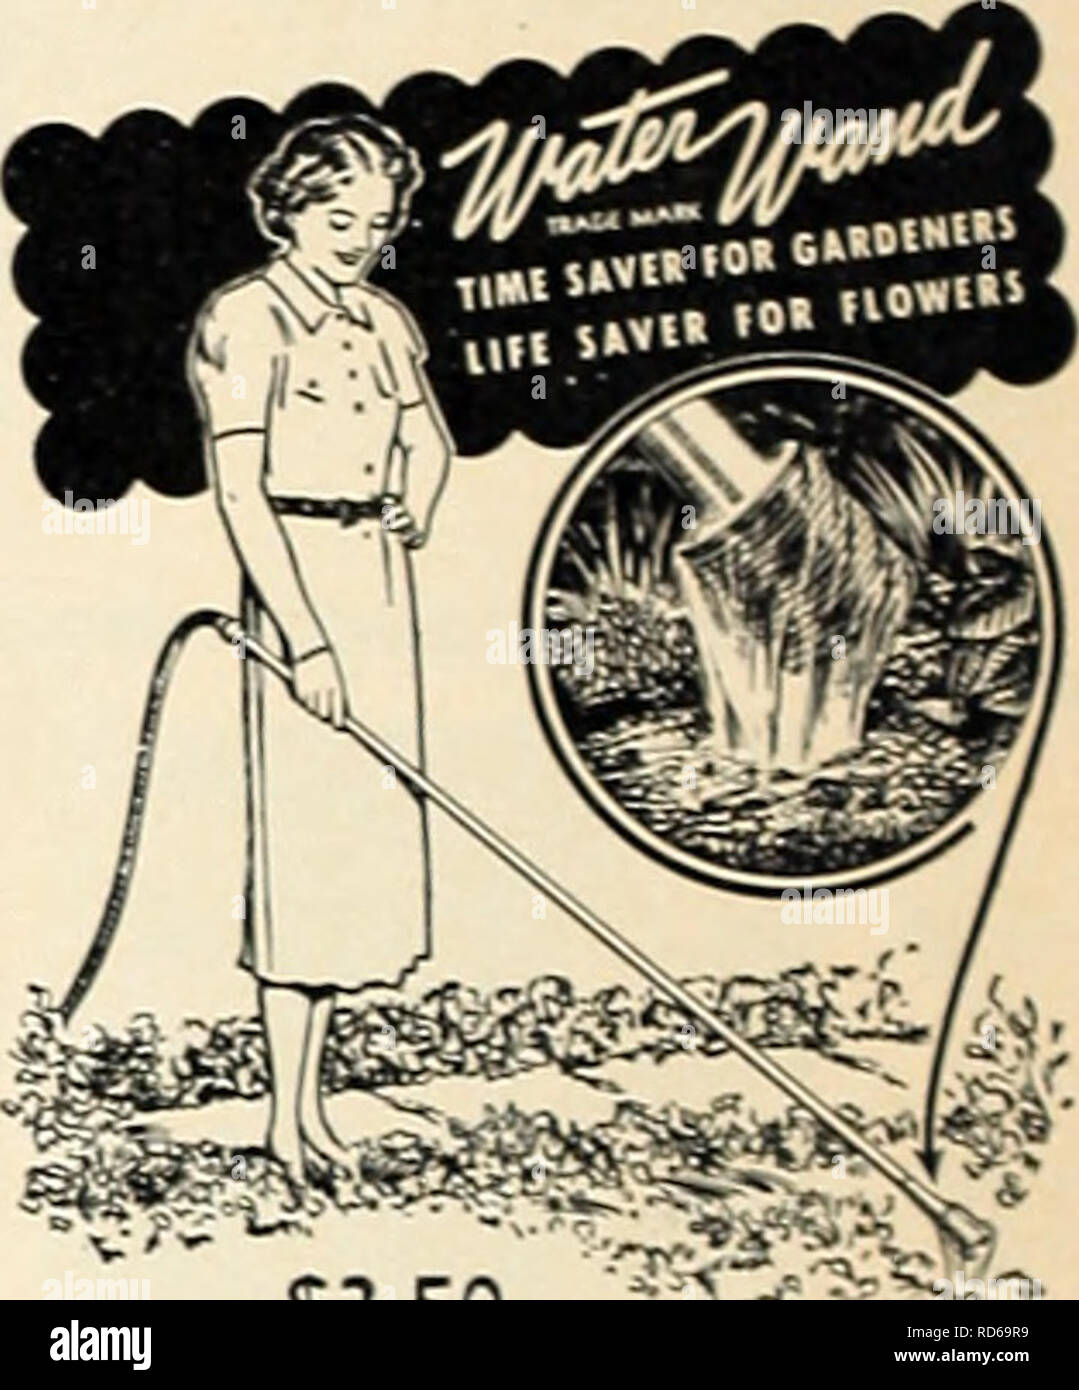 . Currie's garden annual. Flowers Seeds Catalogs; Bulbs (Plants) Seeds Catalogs; Vegetables Seeds Catalogs; Nurseries (Horticulture) Catalogs; Plants, Ornamental Catalogs; Gardening Equipment and supplies Catalogs. SOIL SOAKER for deep socking, the water method opprovcd by ogricultural colleges and nurseries now ovoiloble tor home use. Equipped with regular hose connection for offochinq to hose or pipe No. 0, 12 ft., prica, $1.25; No. 1, 18 ff., $1.75; No. 2, 30 ft., $2.75; No. 3, 50 ft., $4.50.. $2.50 â 's^&gt;c.&gt;â Woterwond deposits a large volume of wo- ter at the roots of plants without Stock Photo